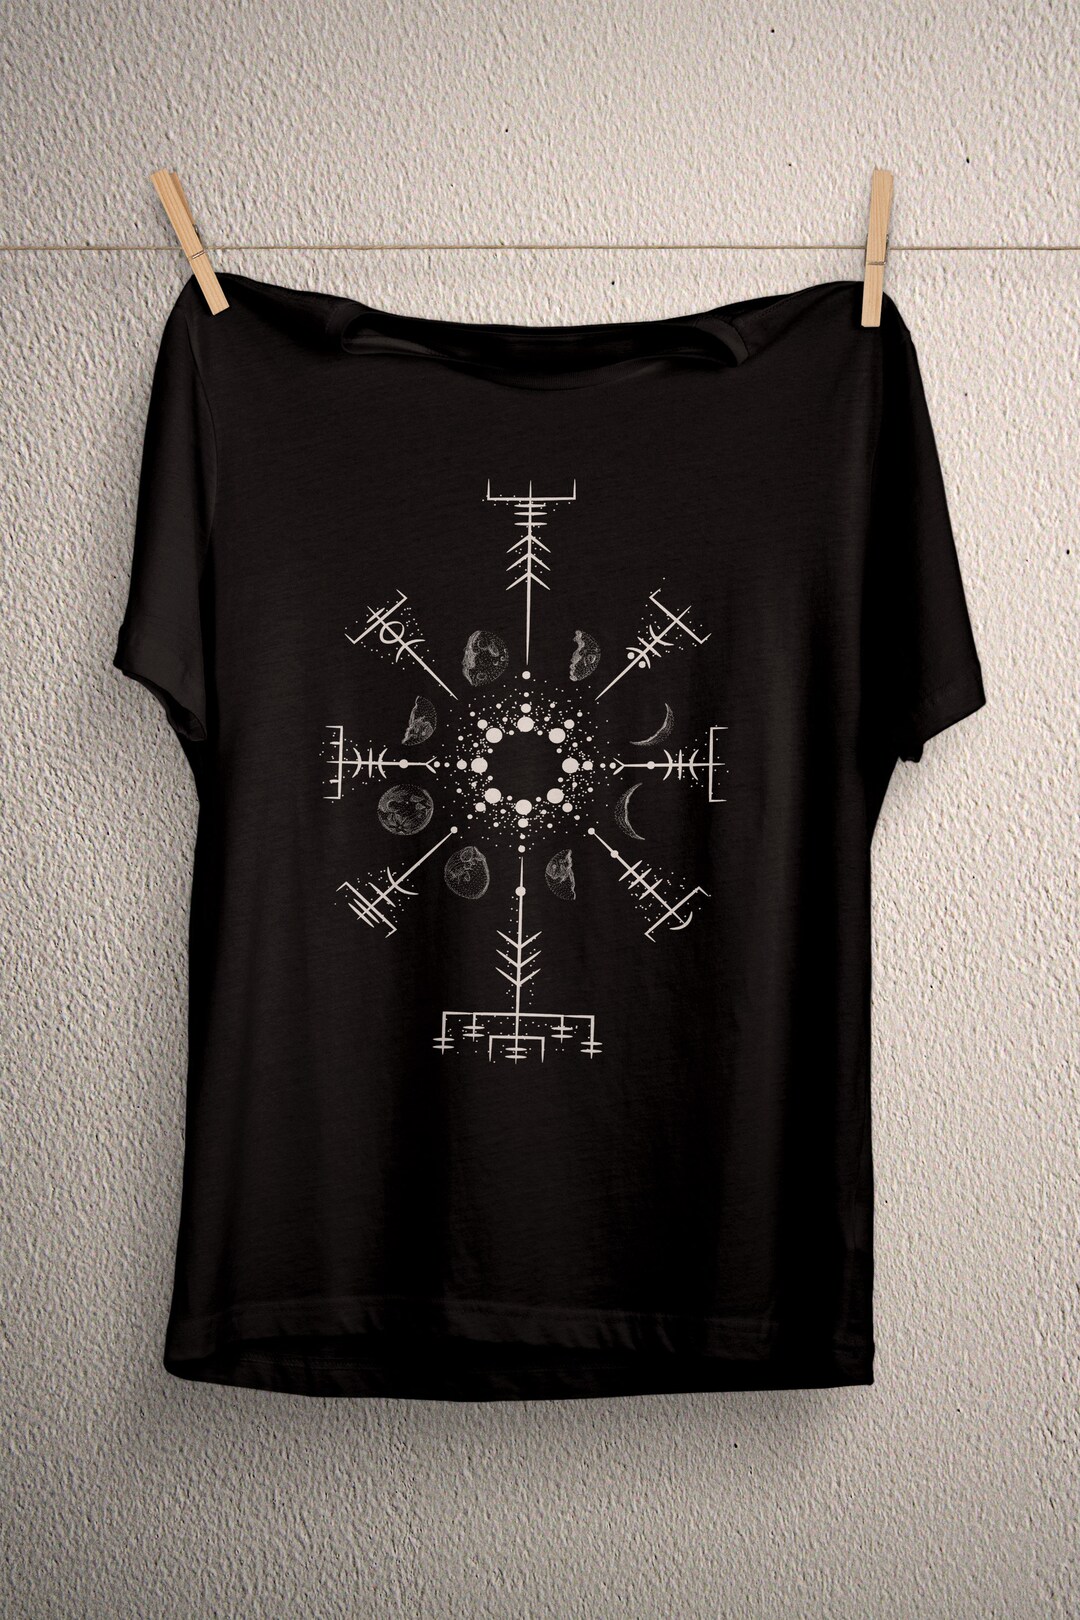 Vegvisir Viking Runes Sign Shirt Wiccan Wicca T-shirt Occult - Etsy